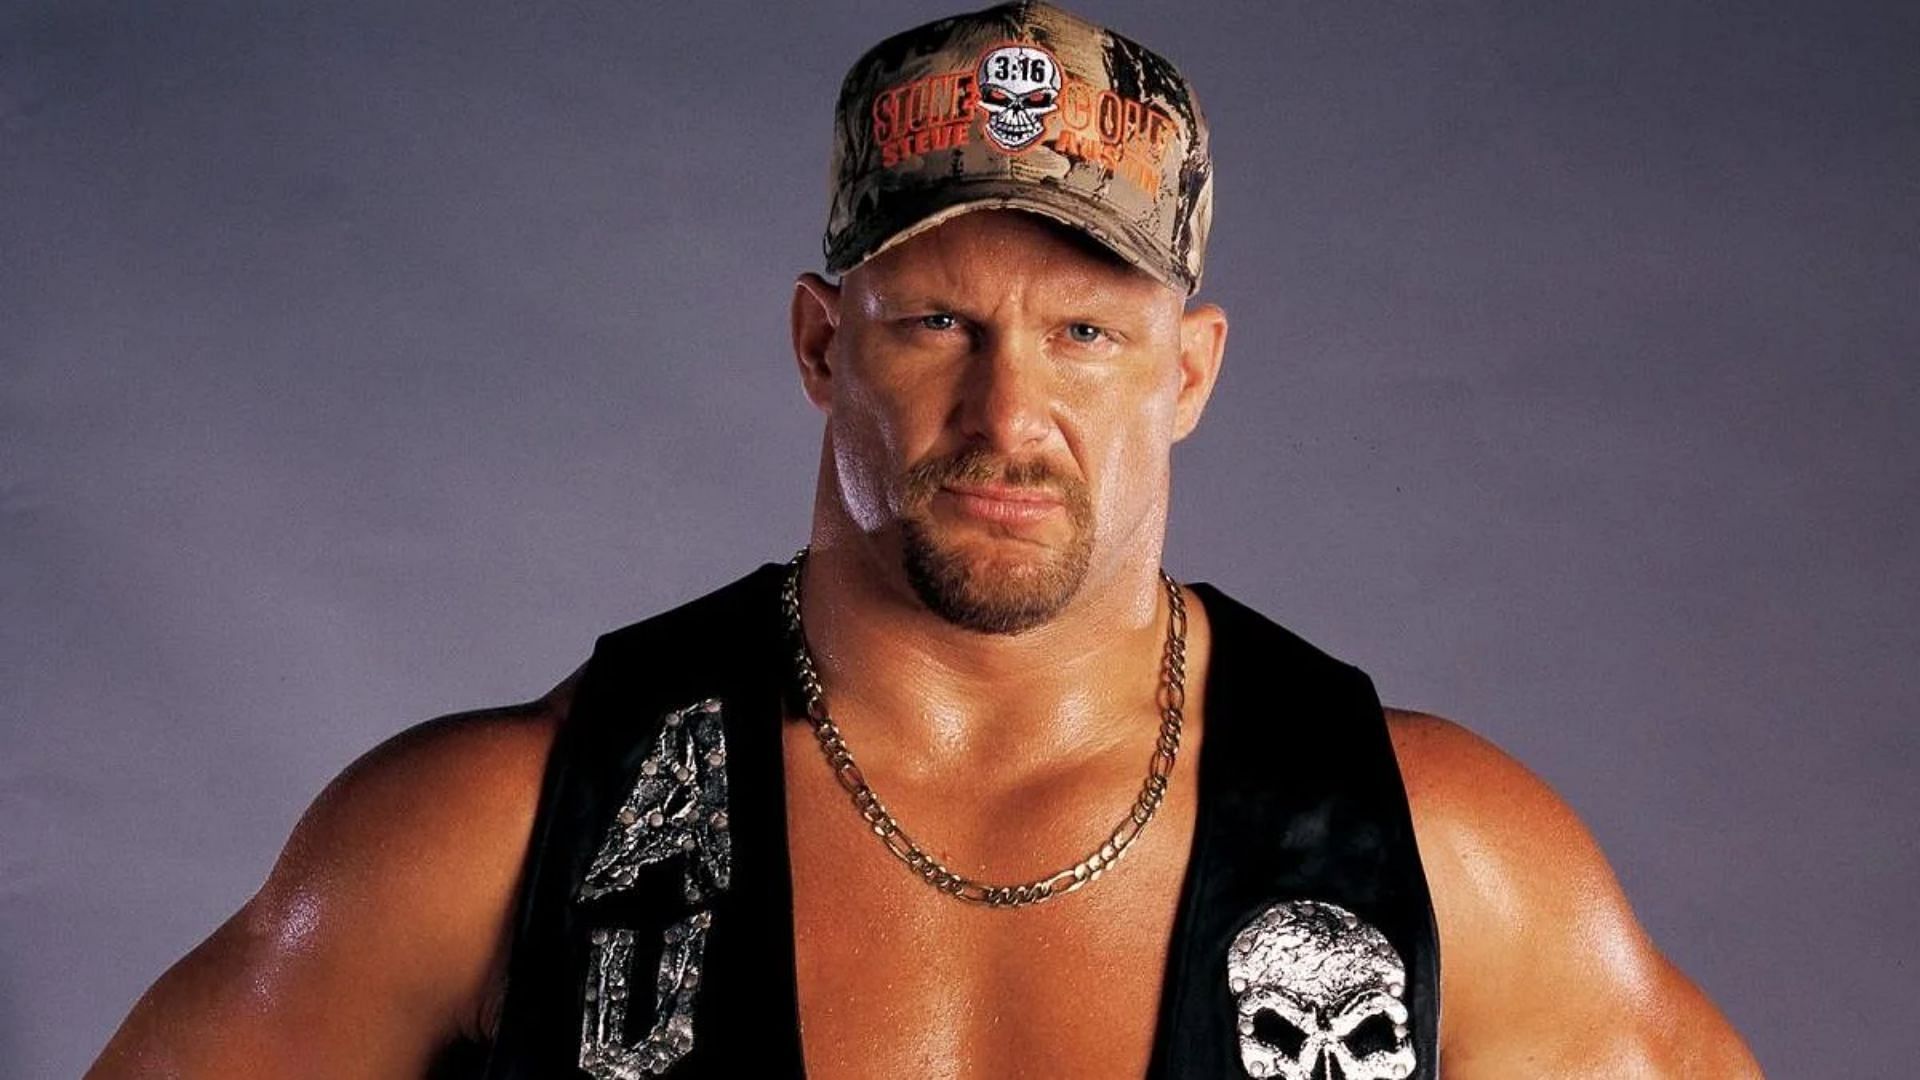 What did this veteran do to Stone Cold Steve Austin to make him turn down a feud?